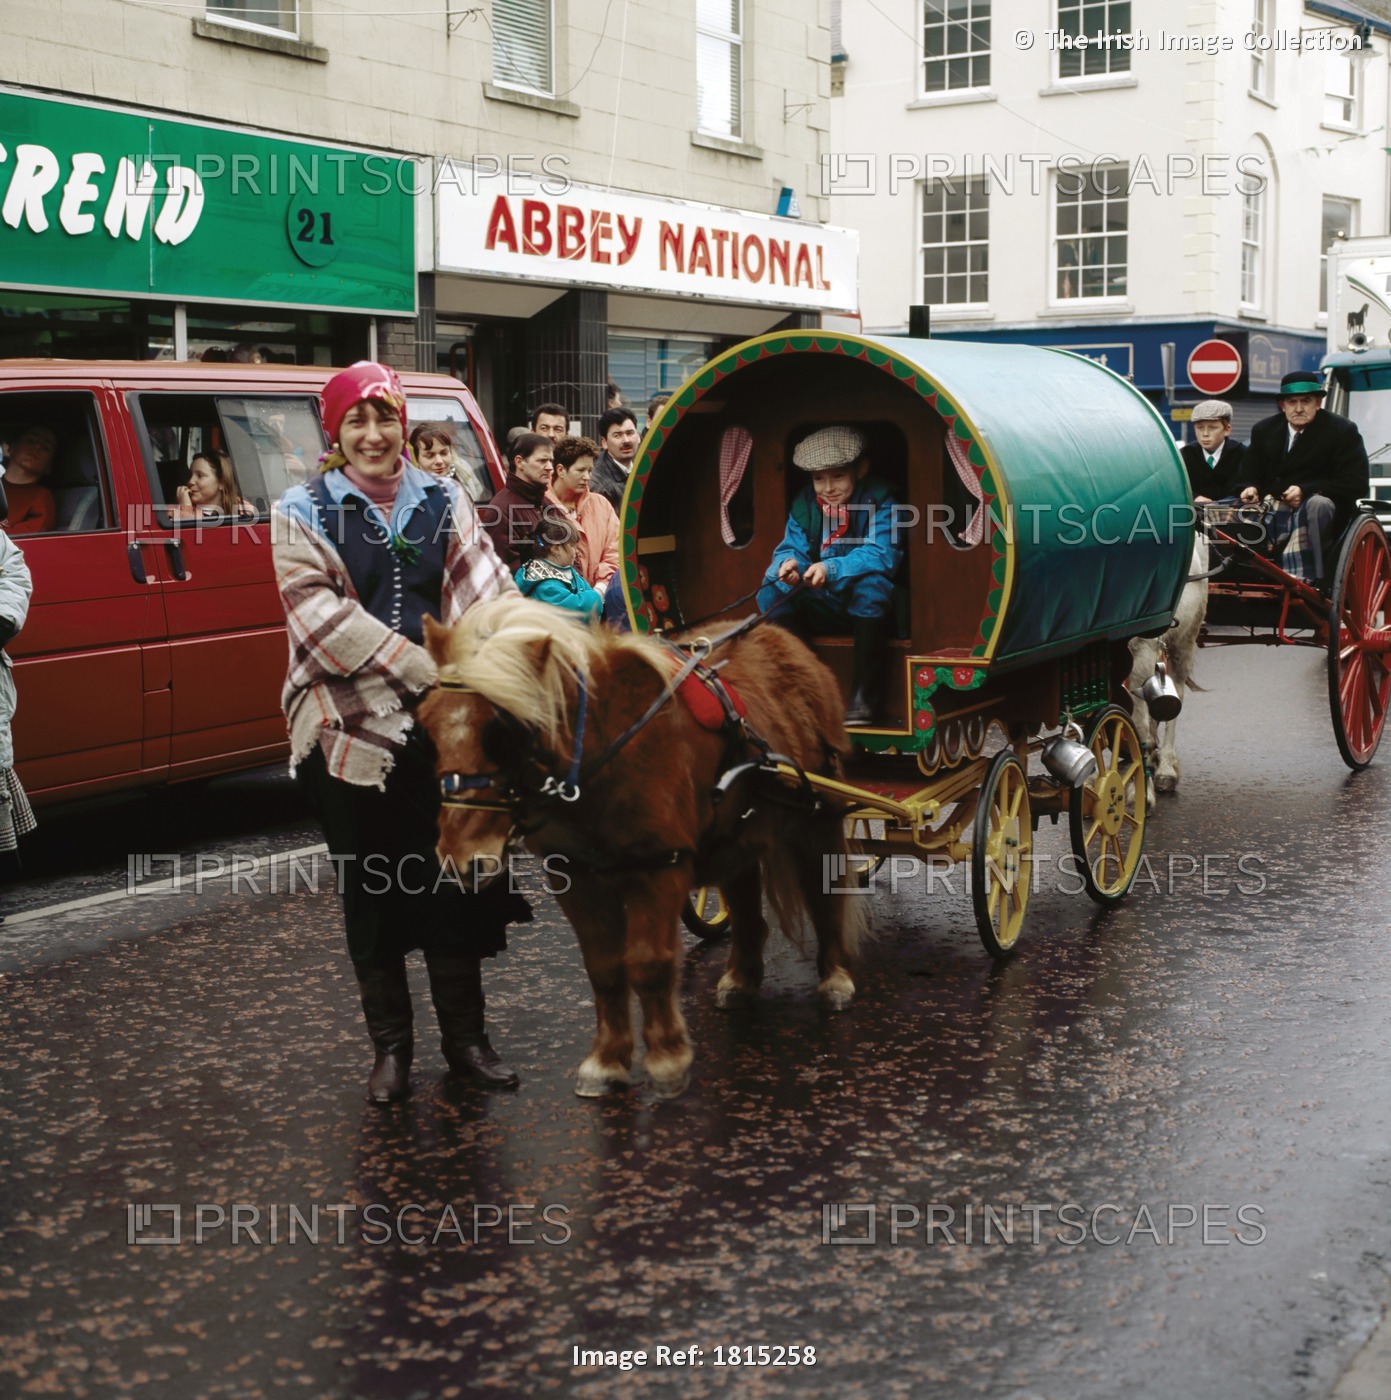 Armagh City, Co Armagh, Northern Ireland, St. Patrick's Day Parade